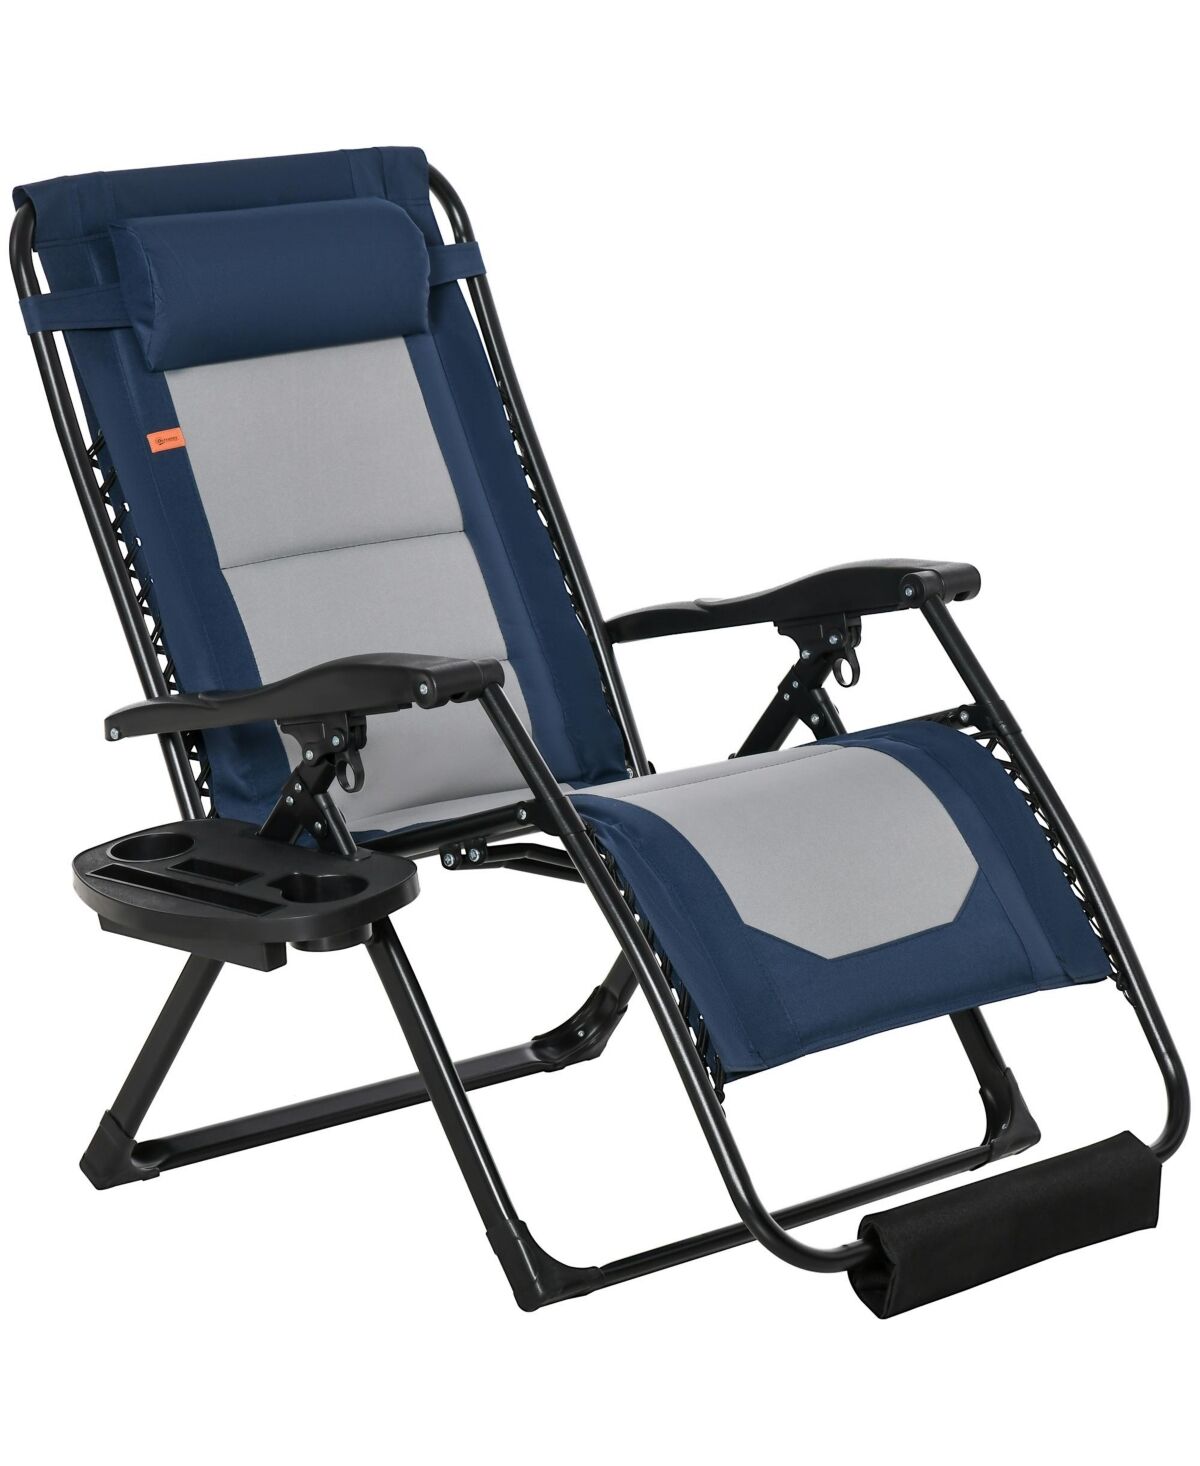 Outsunny Padded Zero Gravity Lounge Chair, Folding Recliner, Outdoor Patio Seating with Cupholder & Tray, Adjustable Reclining Backrest & Footrest w/